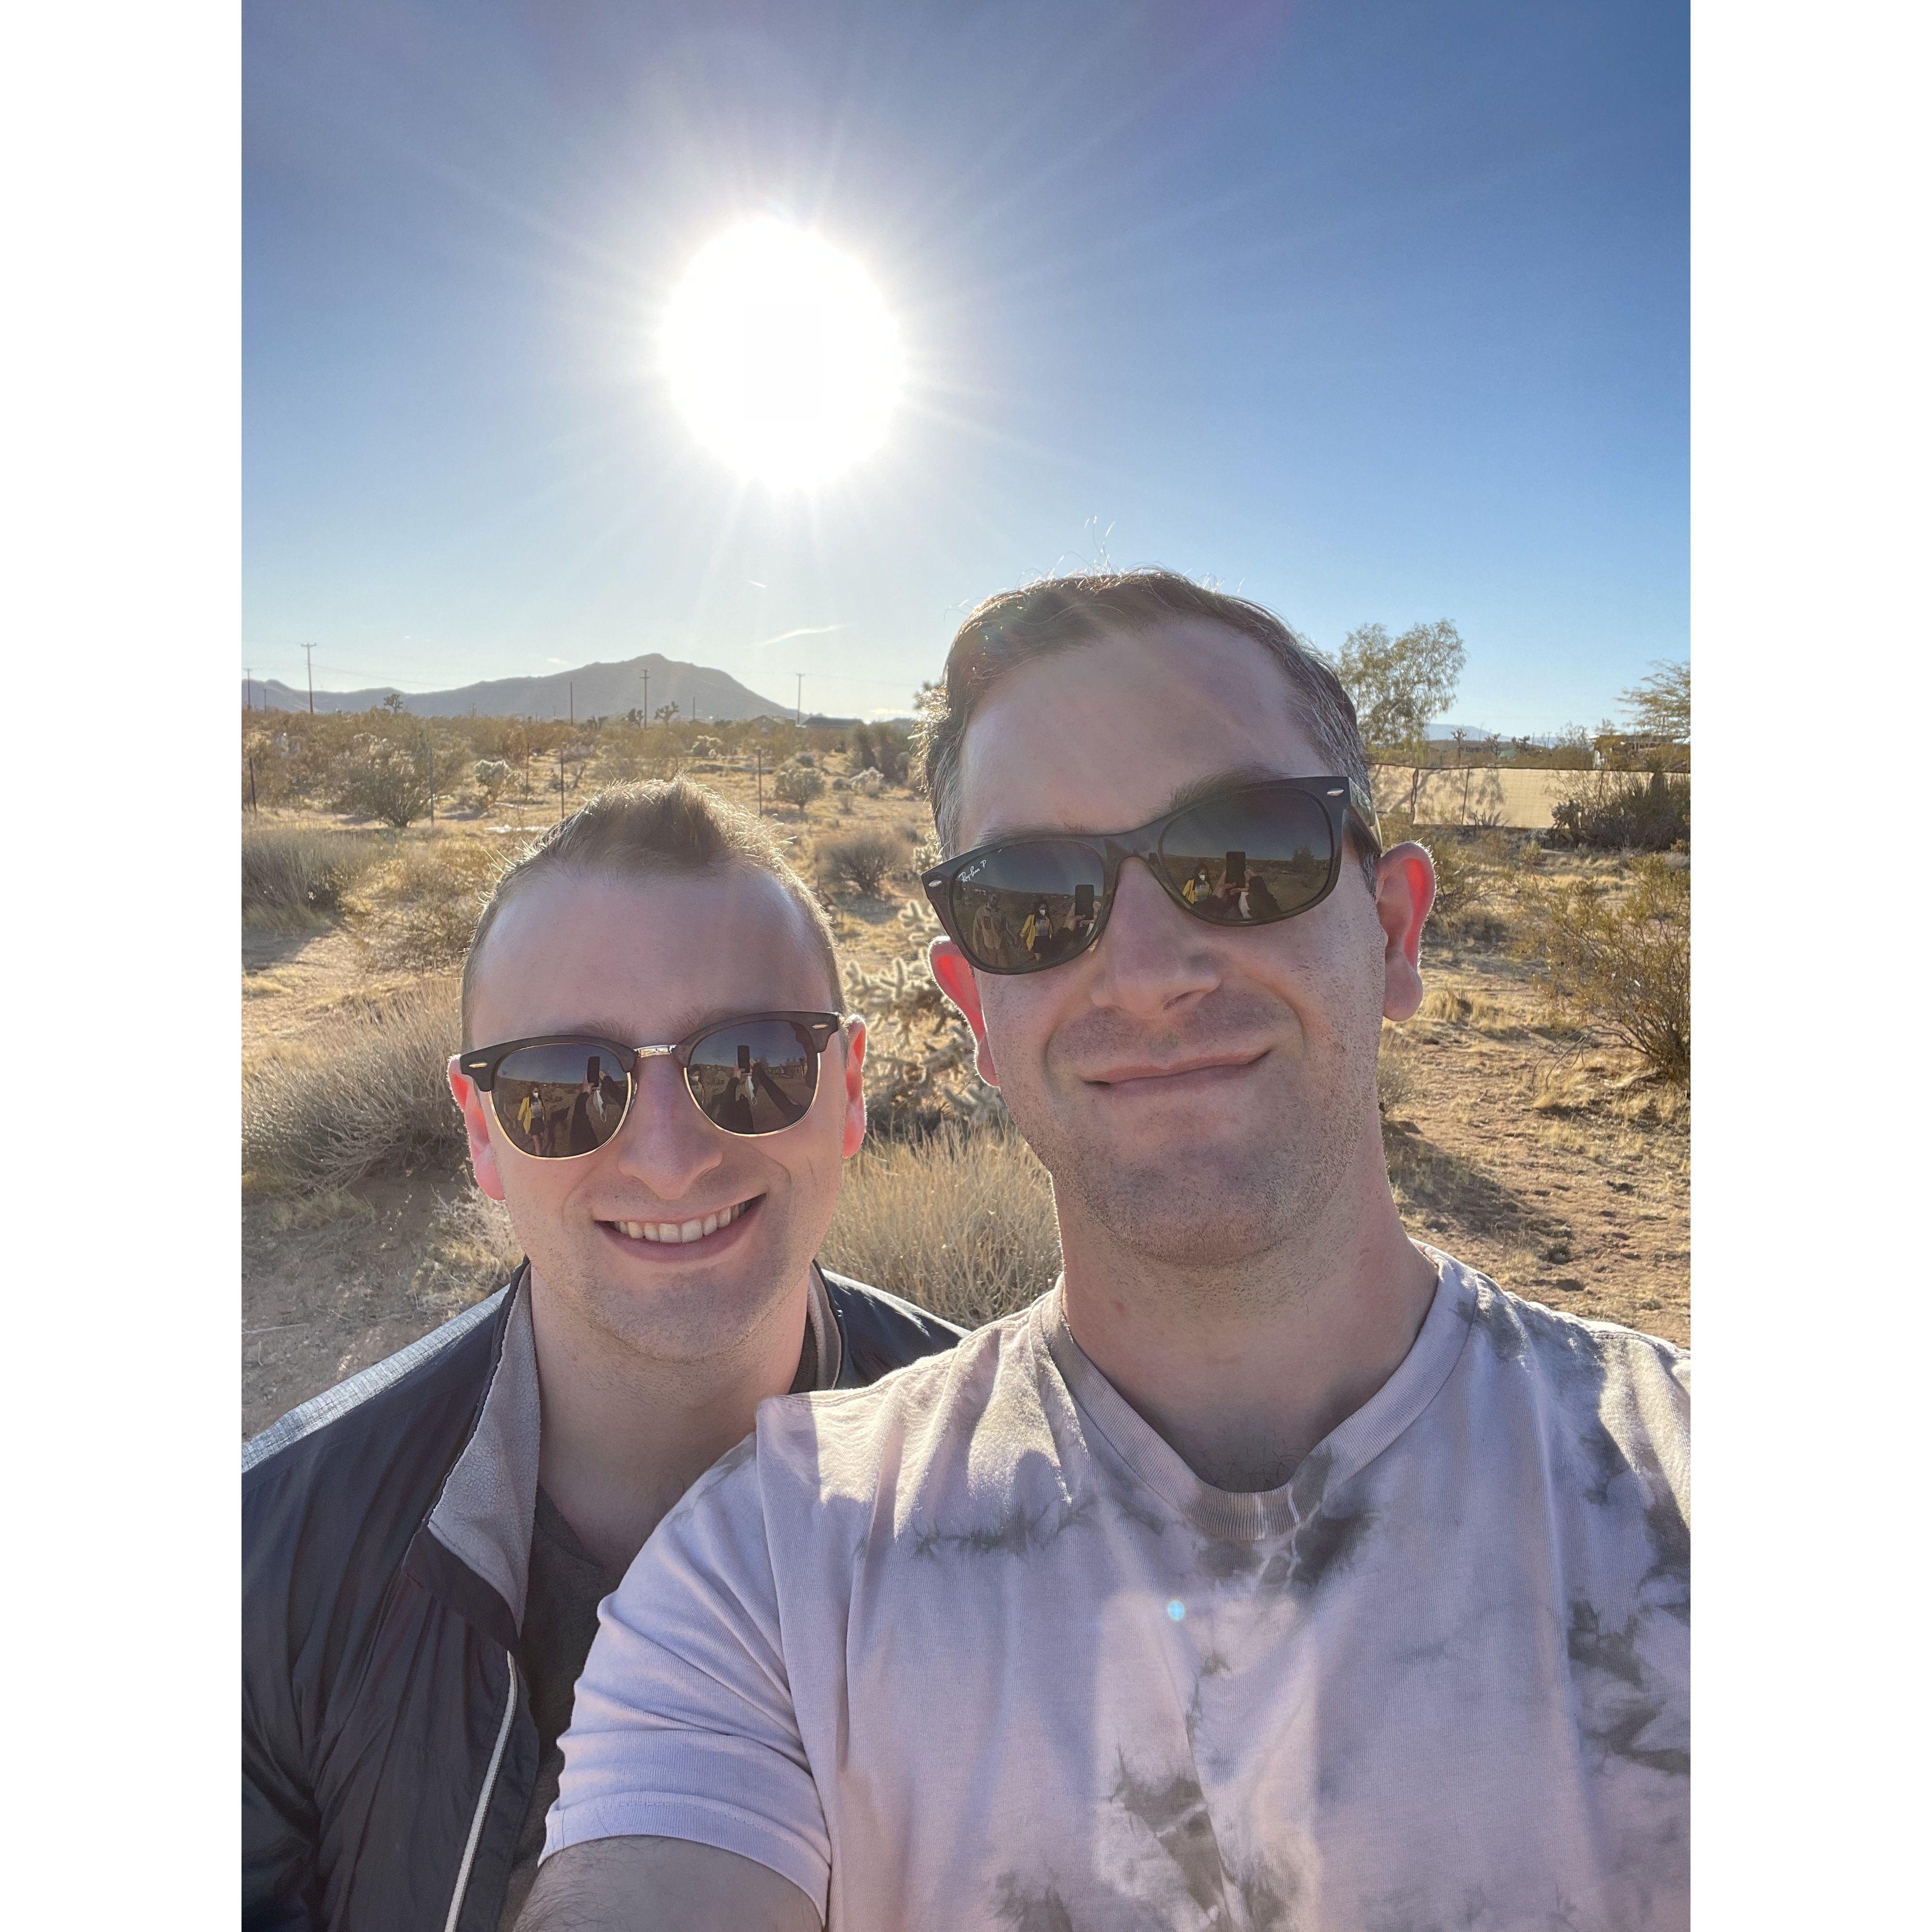 February 2021 
Exploring Joshua Tree NP with friends during a WFH week in the desert